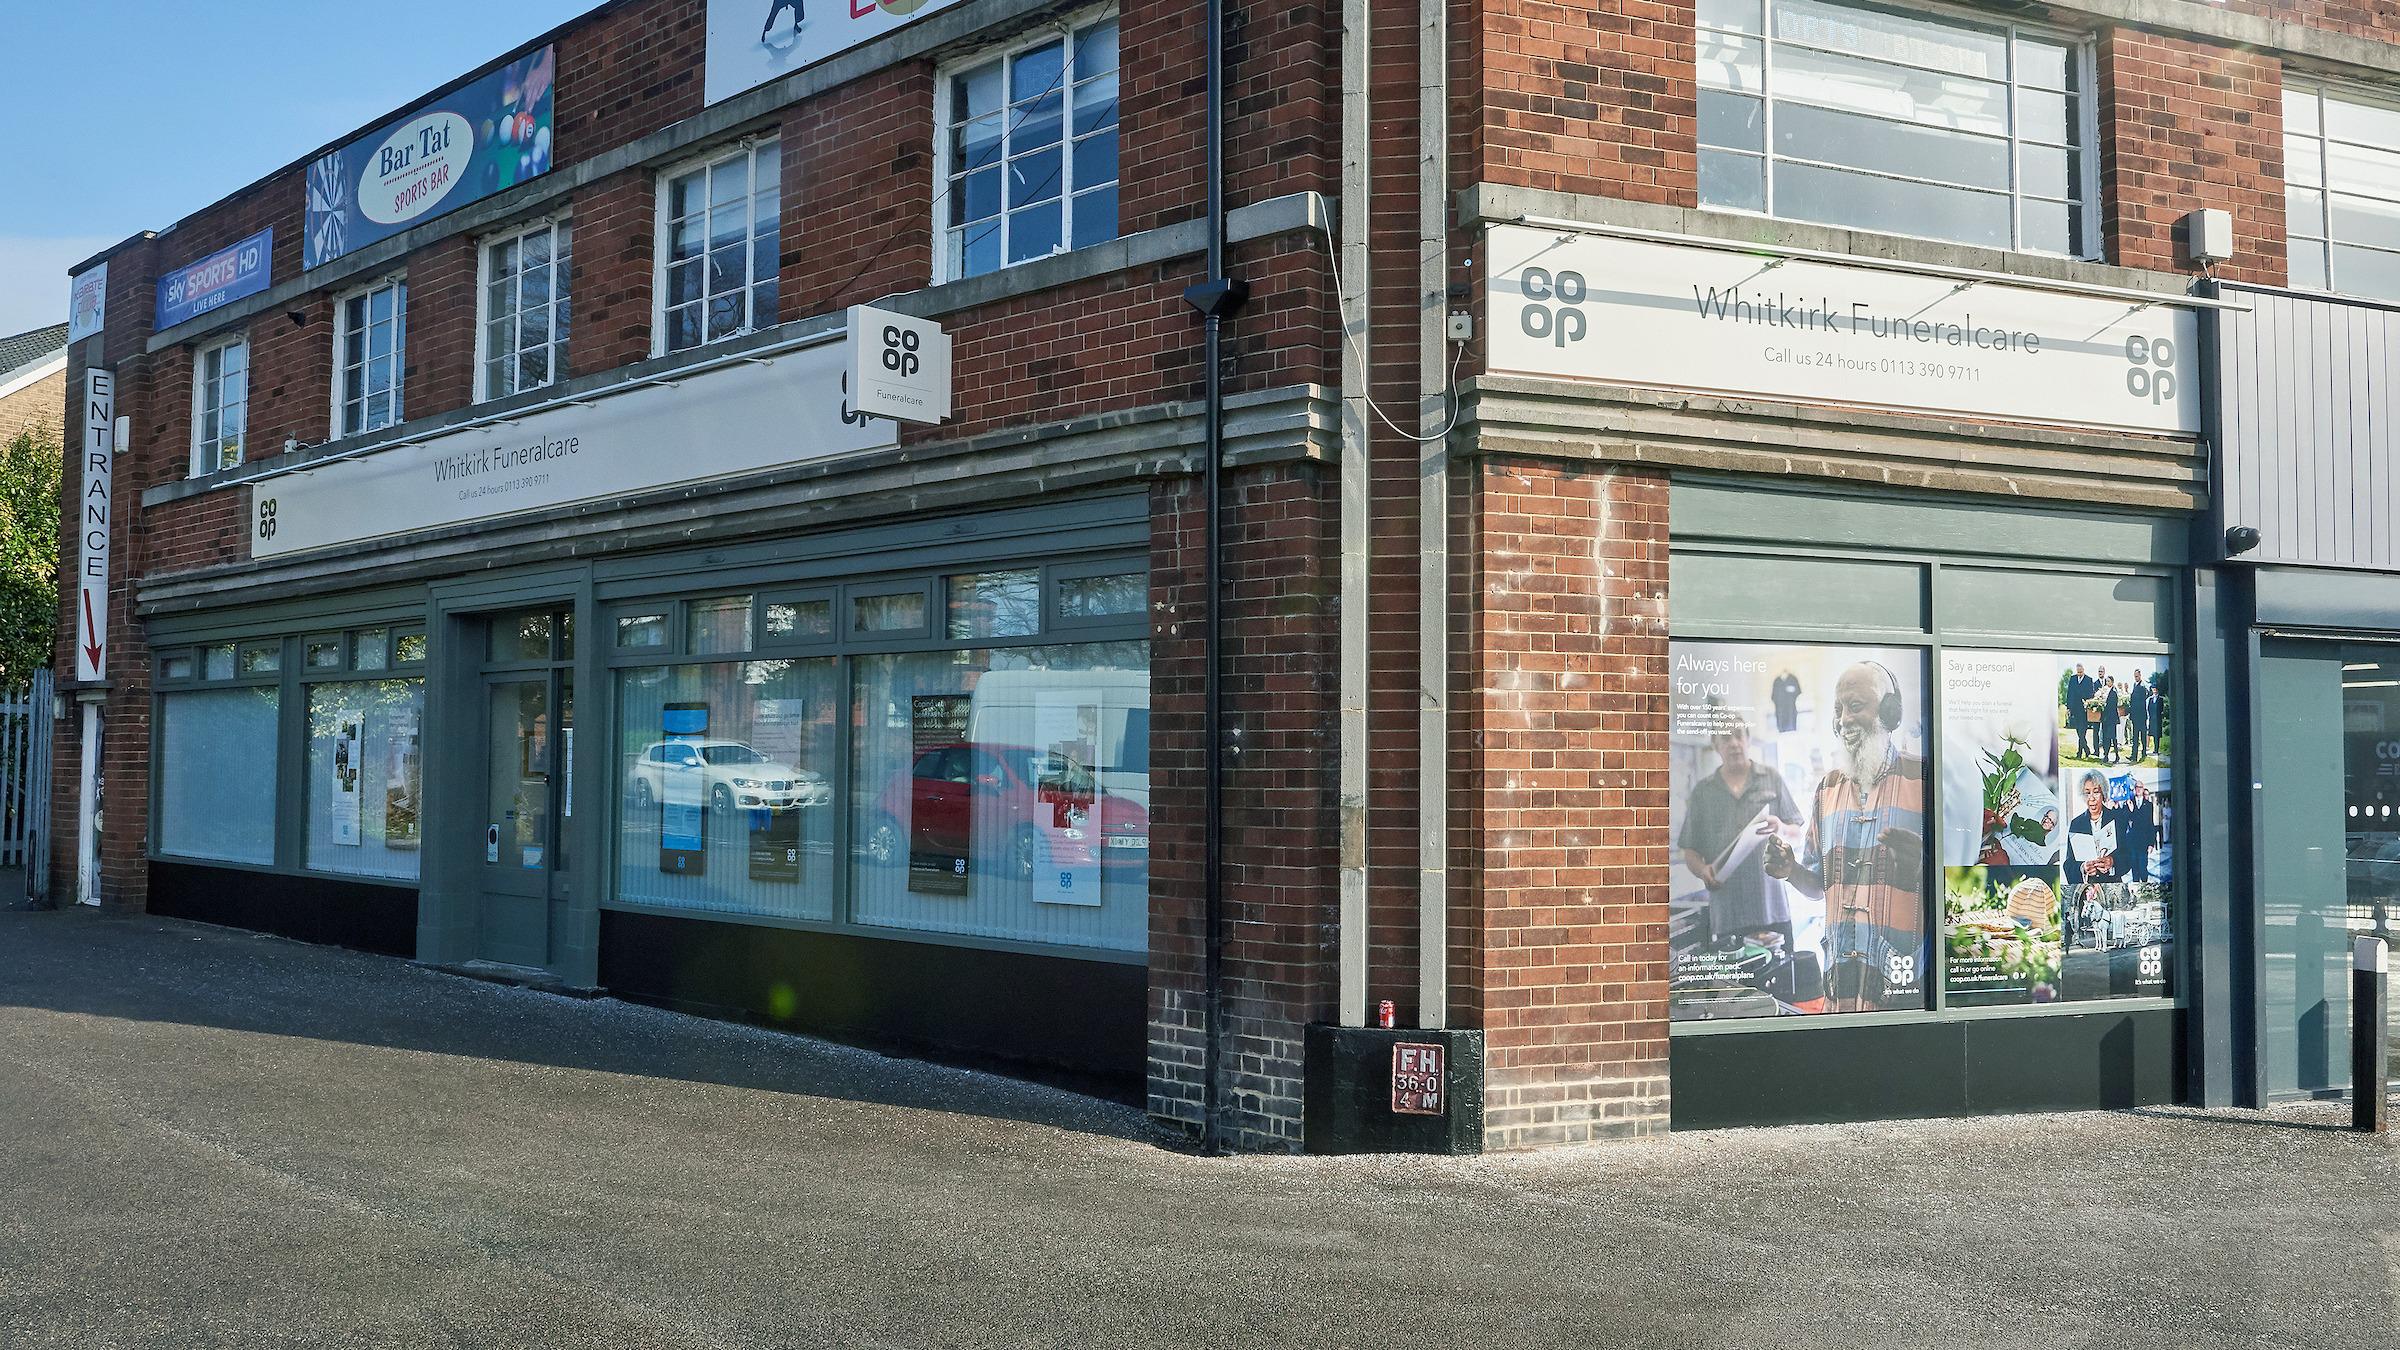 Co-op Funeralcare, Whitkirk - Funeral Directors Co-op Funeralcare, Whitkirk Leeds 01133 909711